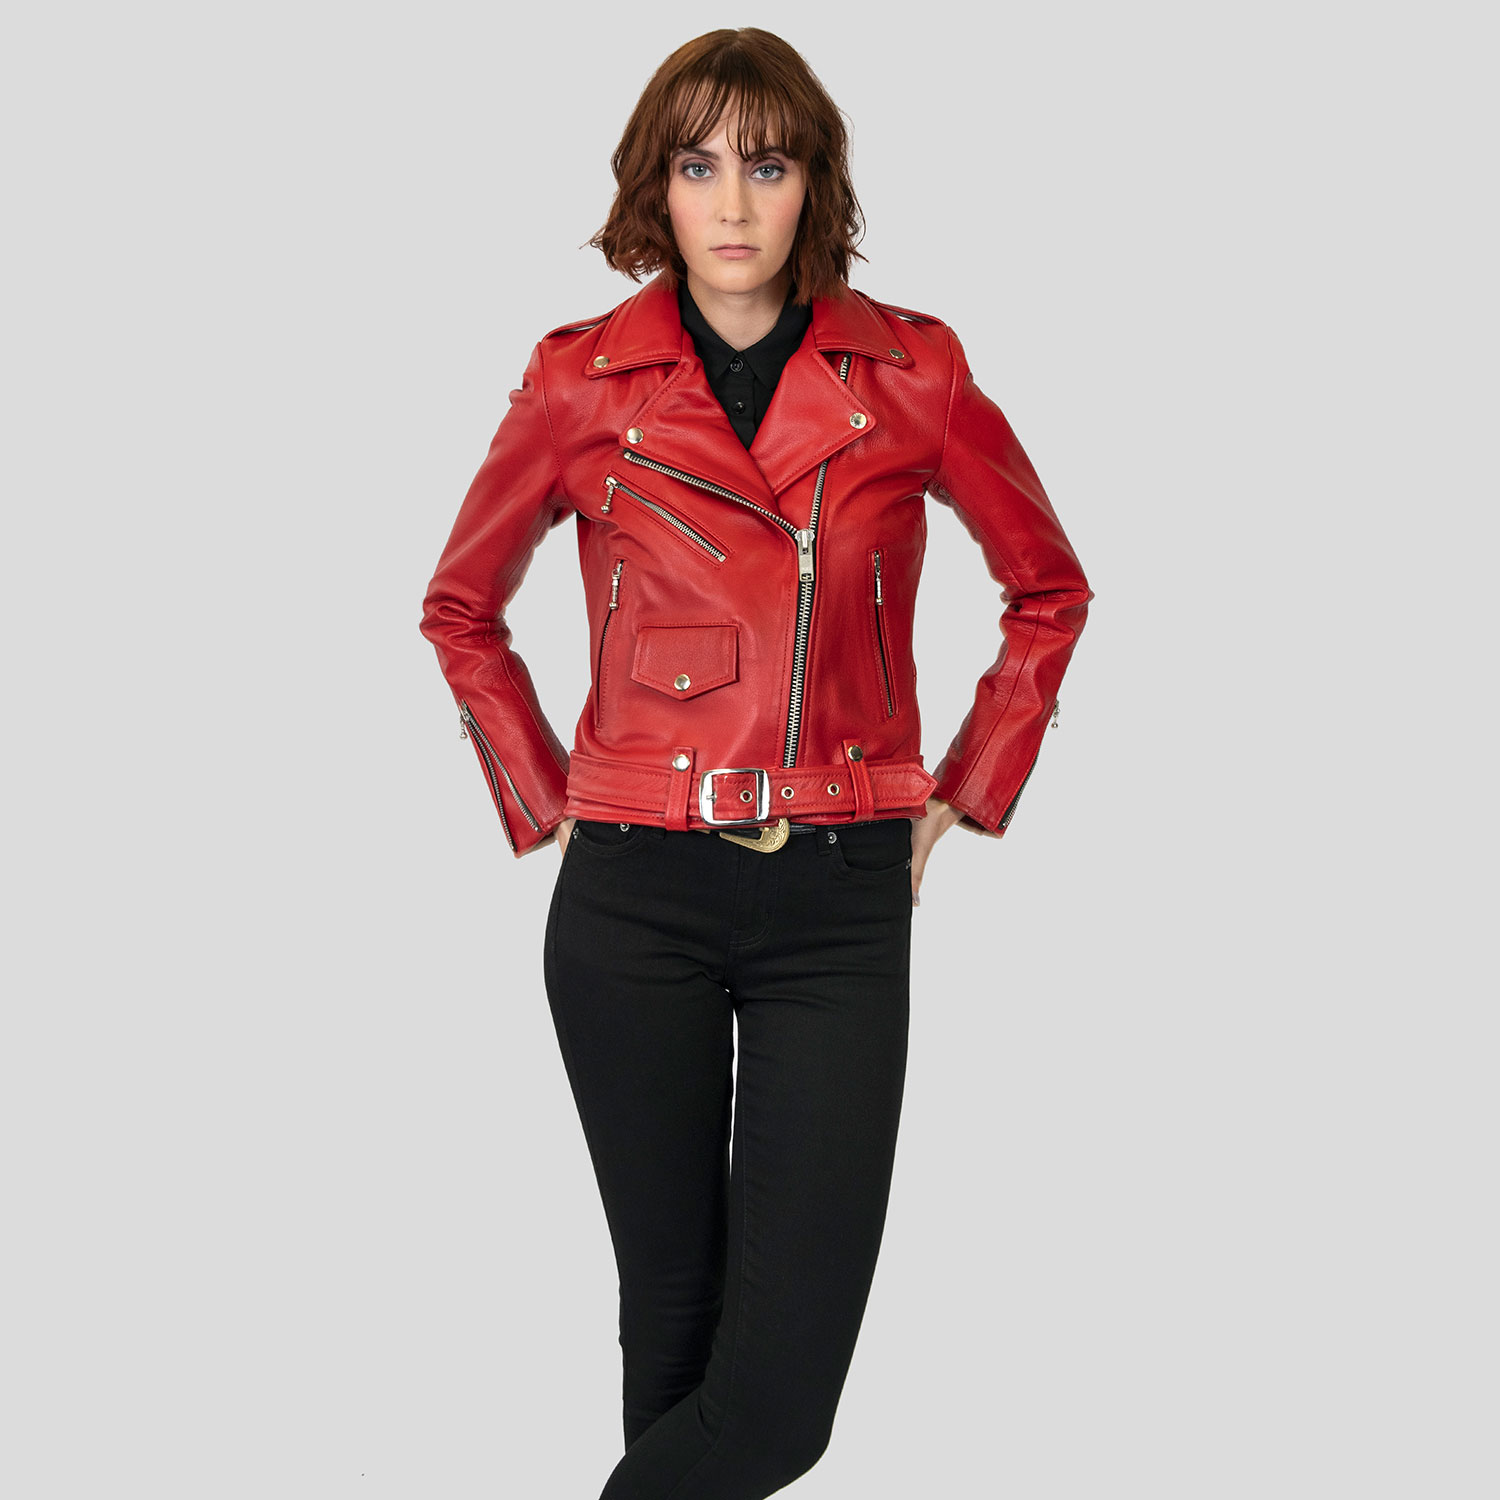 Commando - Blood Red To Jacket Apparel Straight Hell Leather 